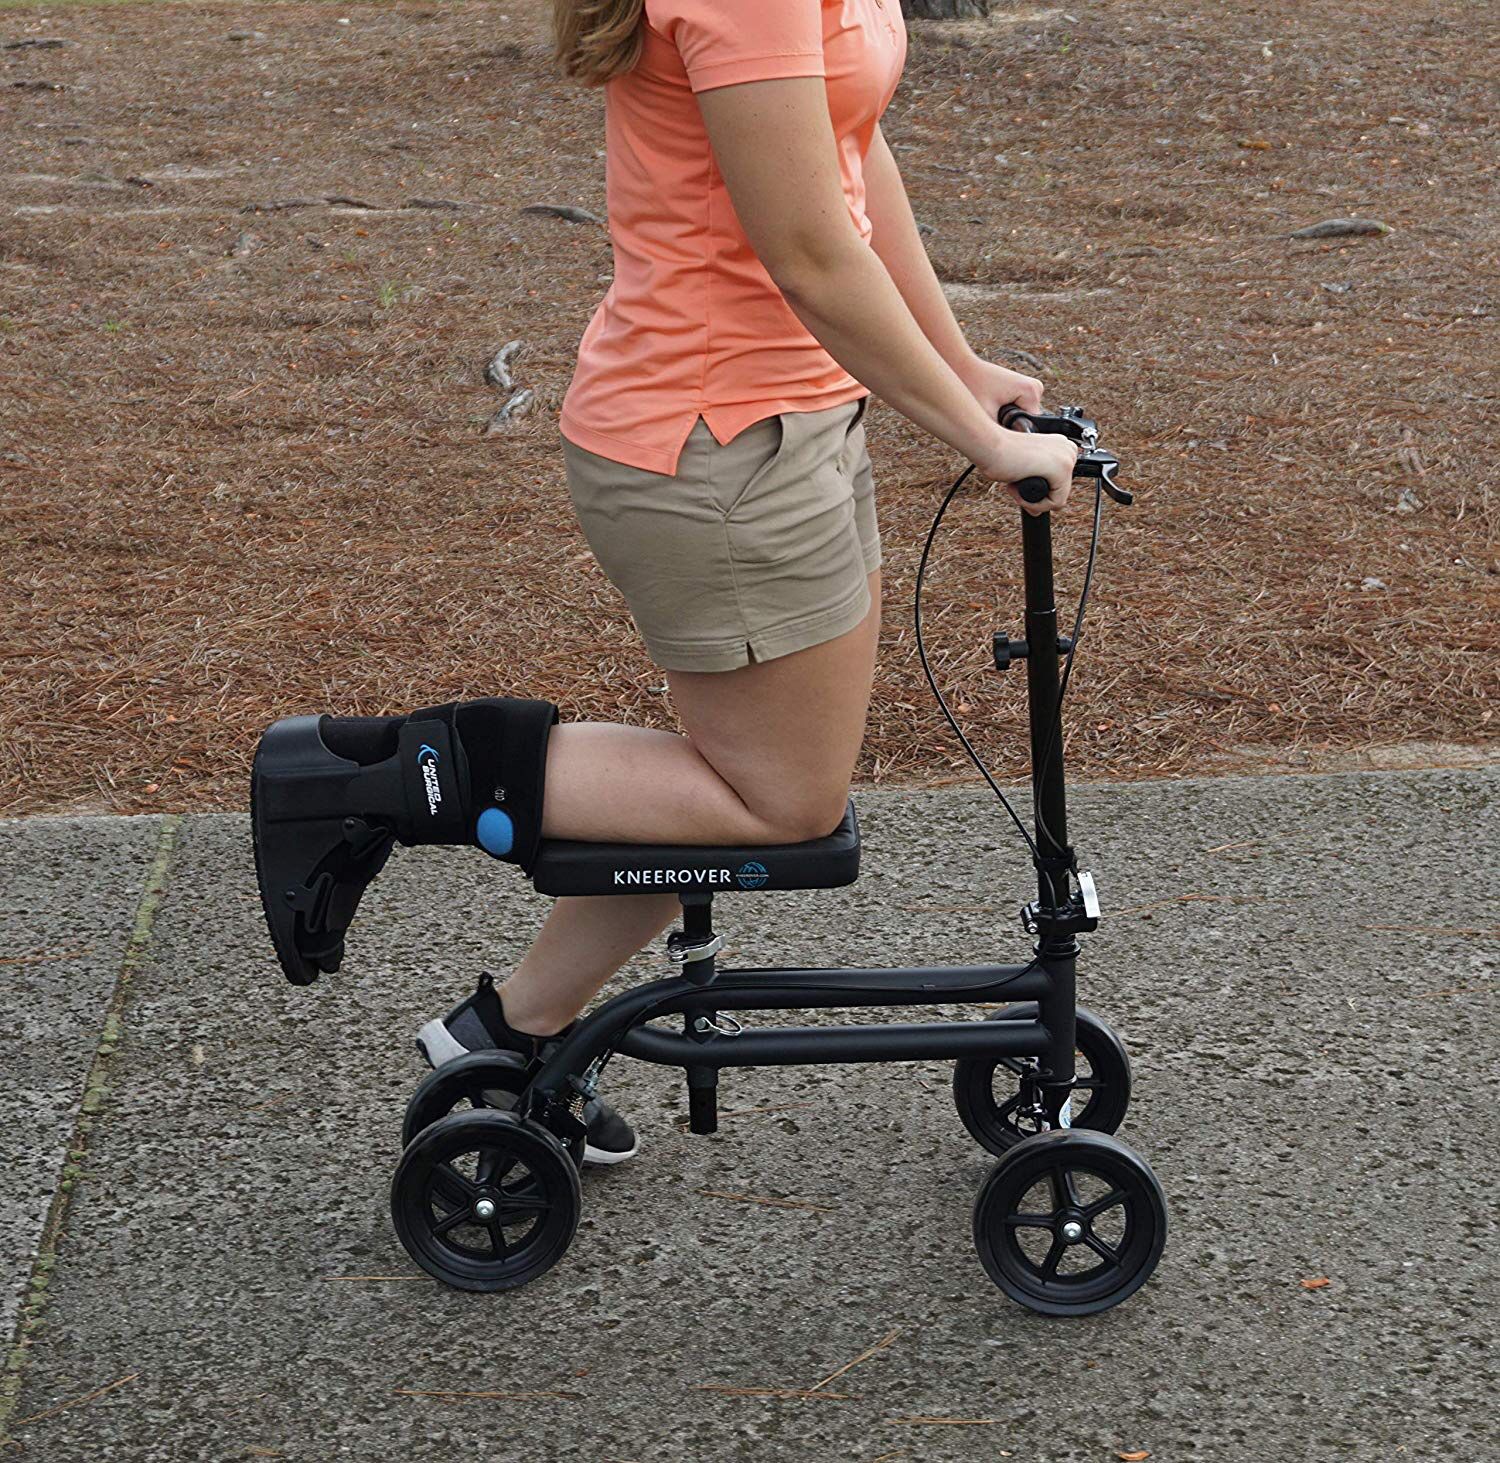 Knee Scooter With extra foam covering